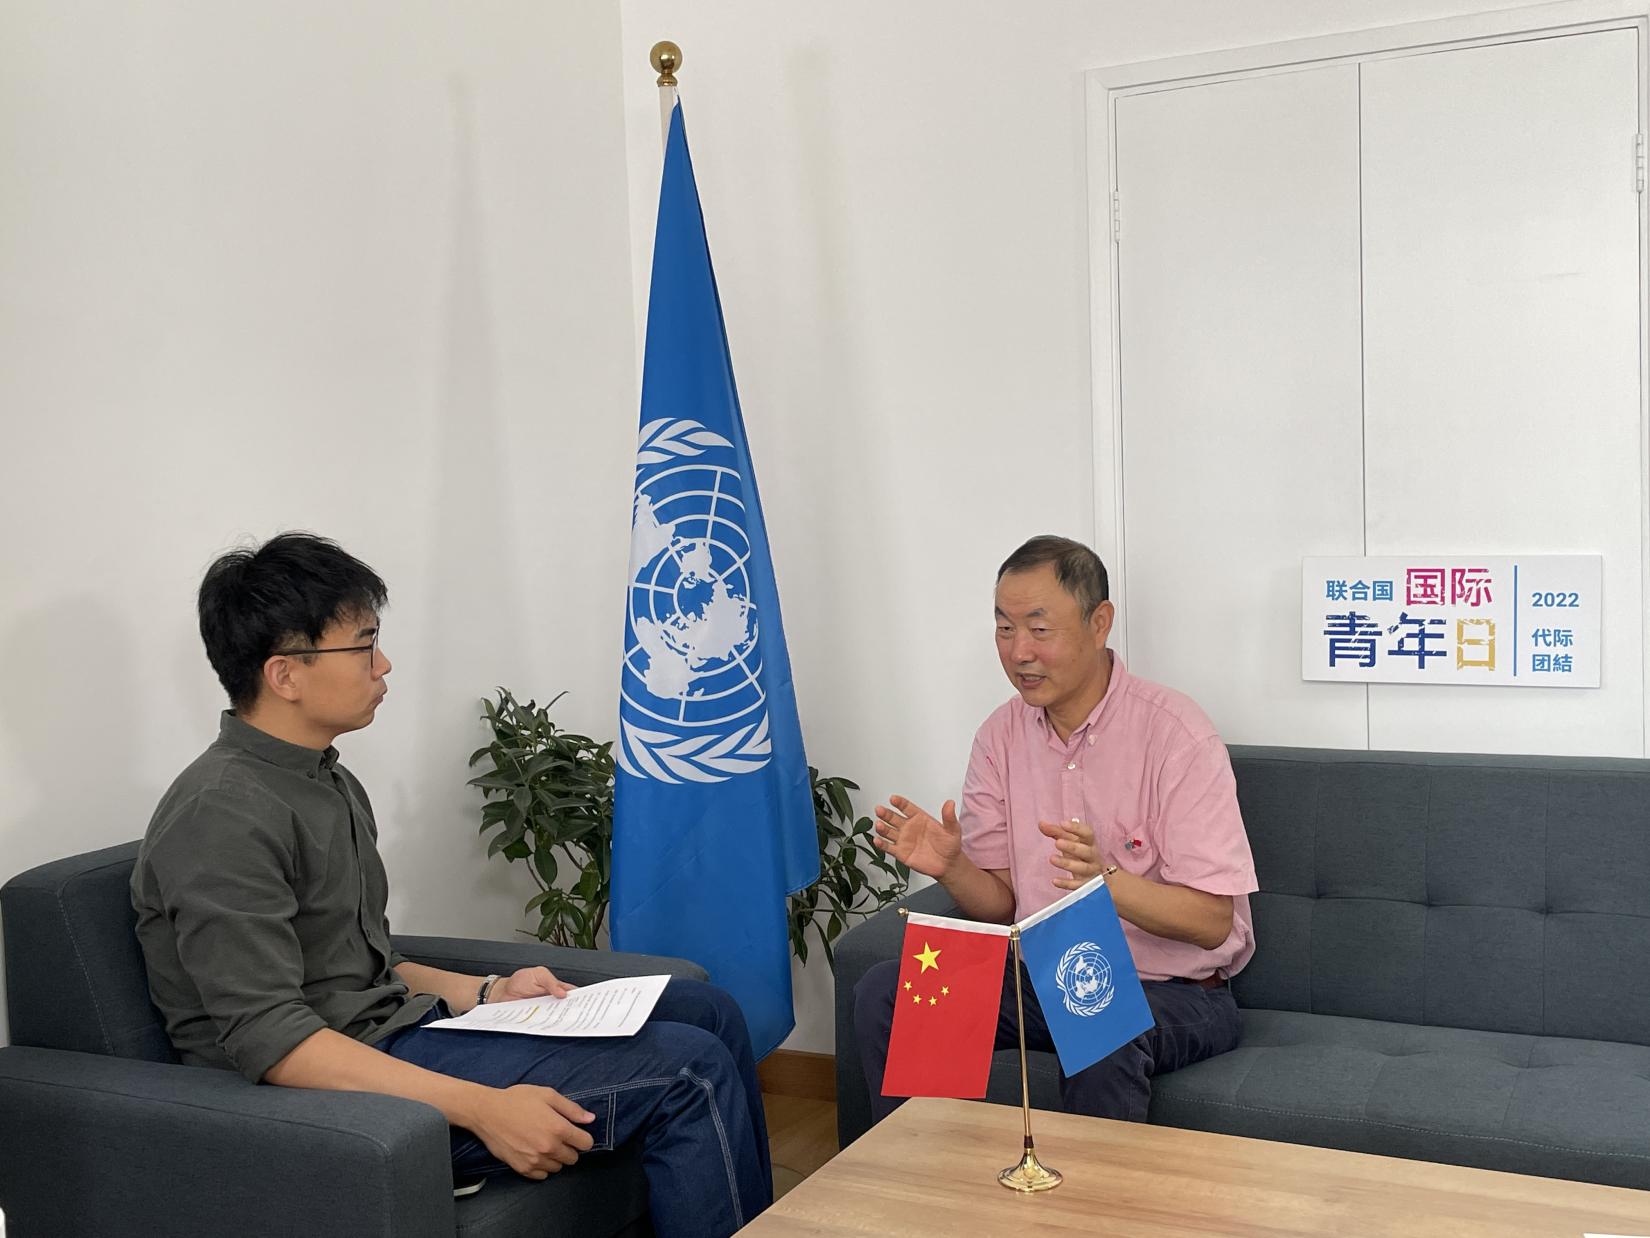 Mr. Zhang Zhenshan speaks in an Interview for International Youth Day 2022